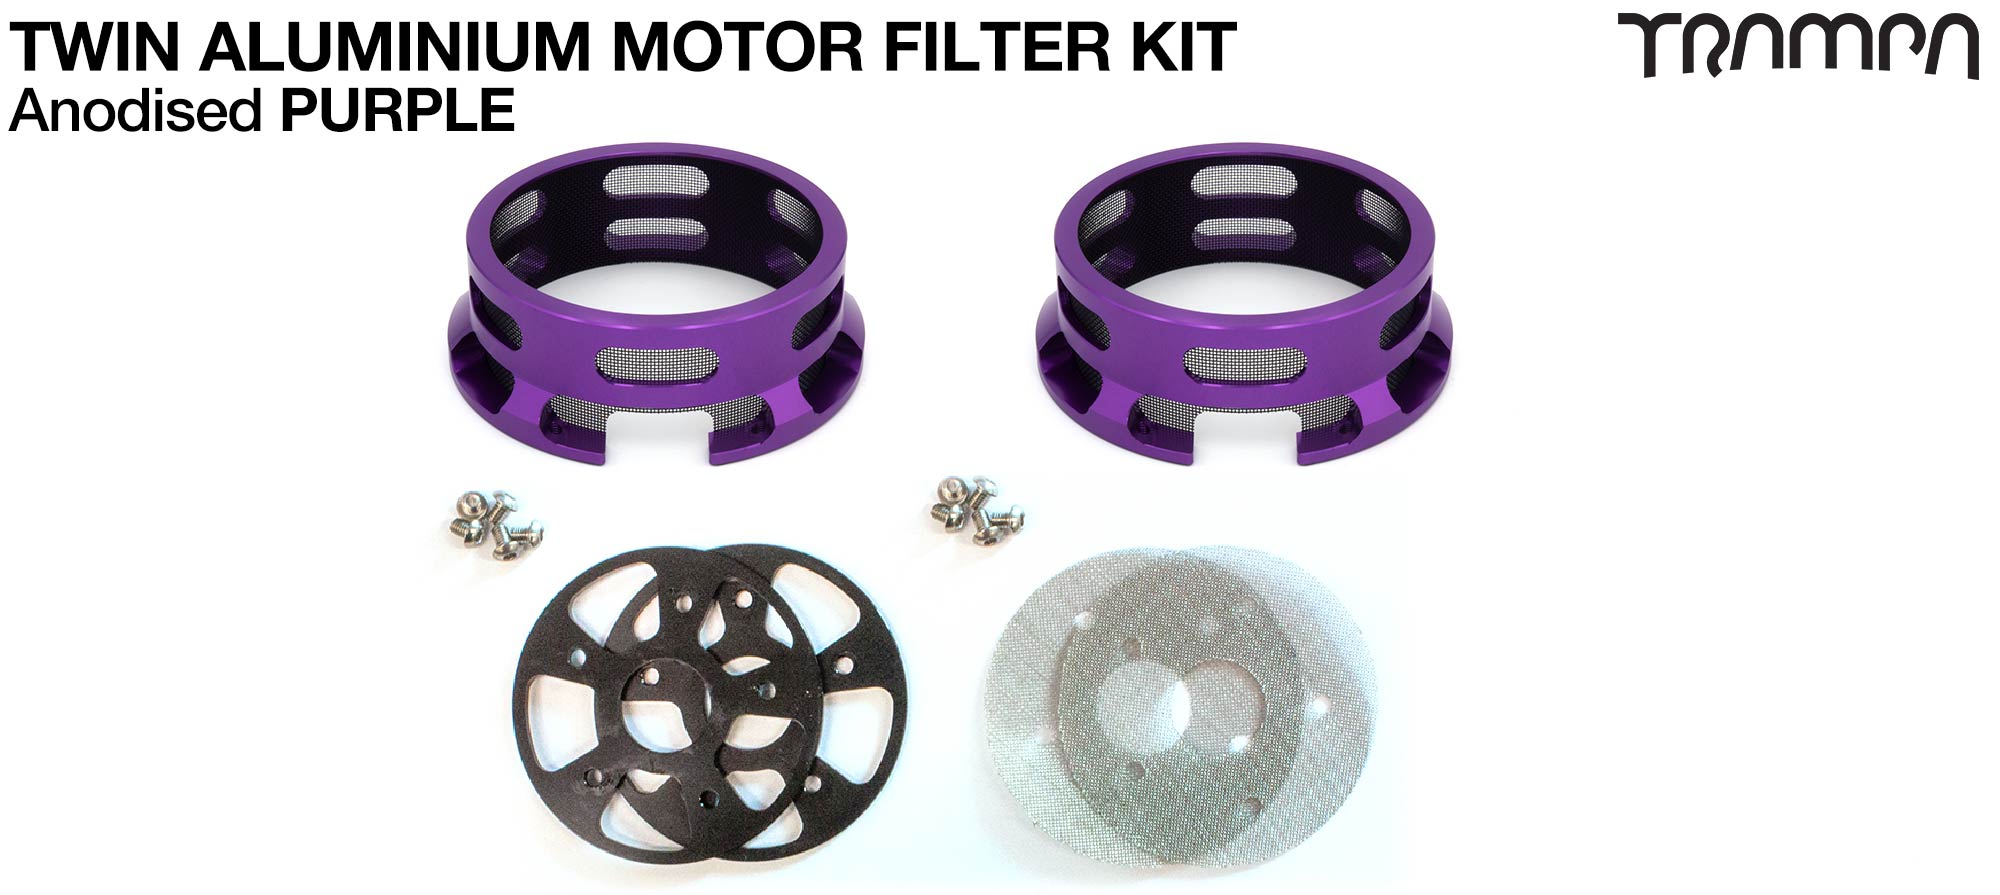 14FiFties HALF CAGE Motor protection - PURPLE anodised with Filter & Fan - TWIN